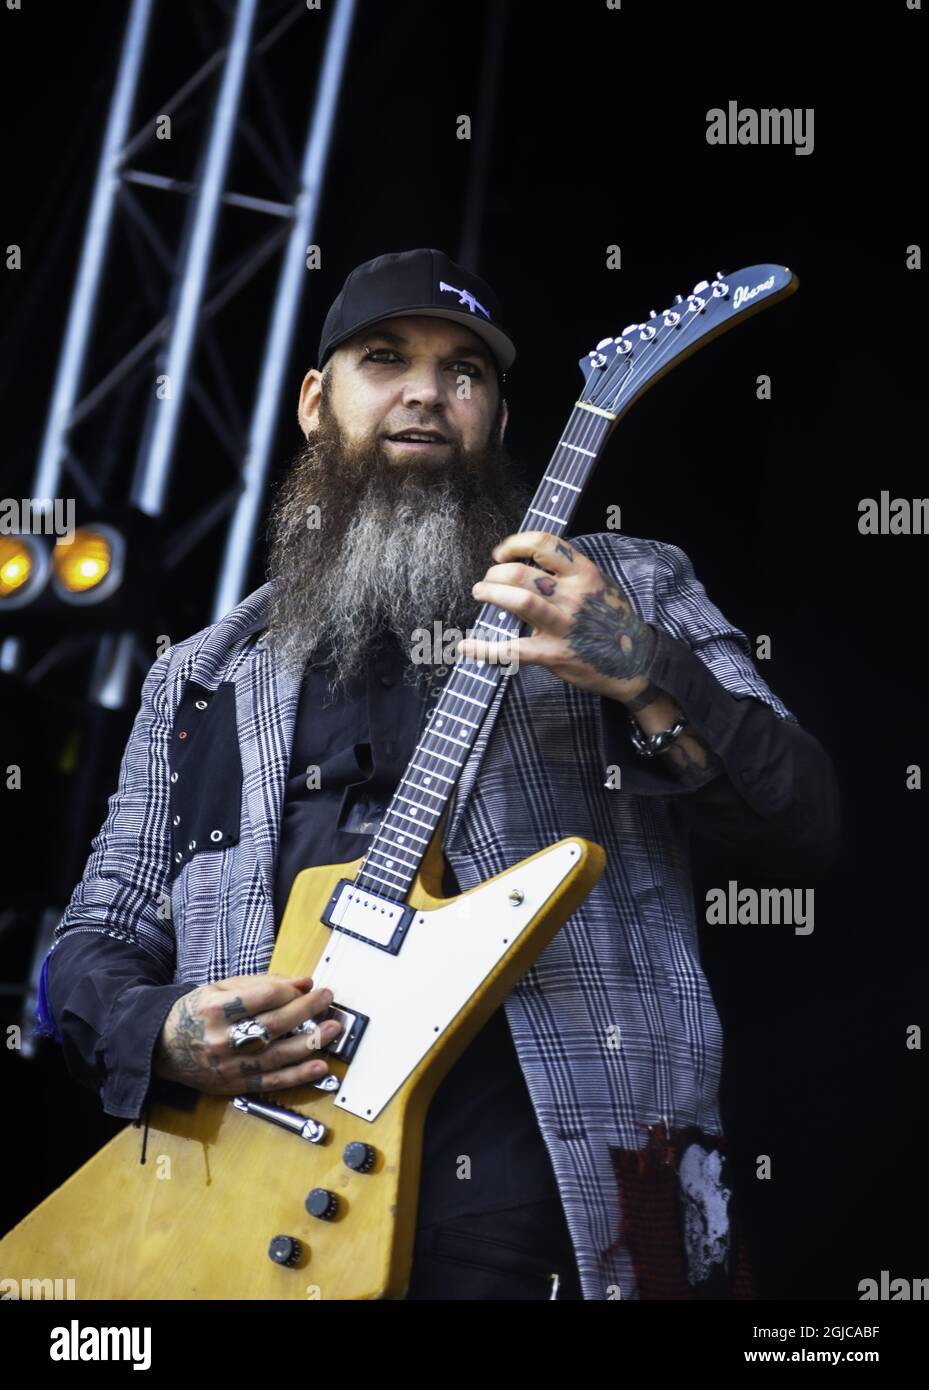 Three Days Grace, guitarist Barry Stock, performing live on stage at Sweden  Rock Festival 2019-06-06. (c) Helena Larsson / TT / kod 2727 Stock Photo -  Alamy